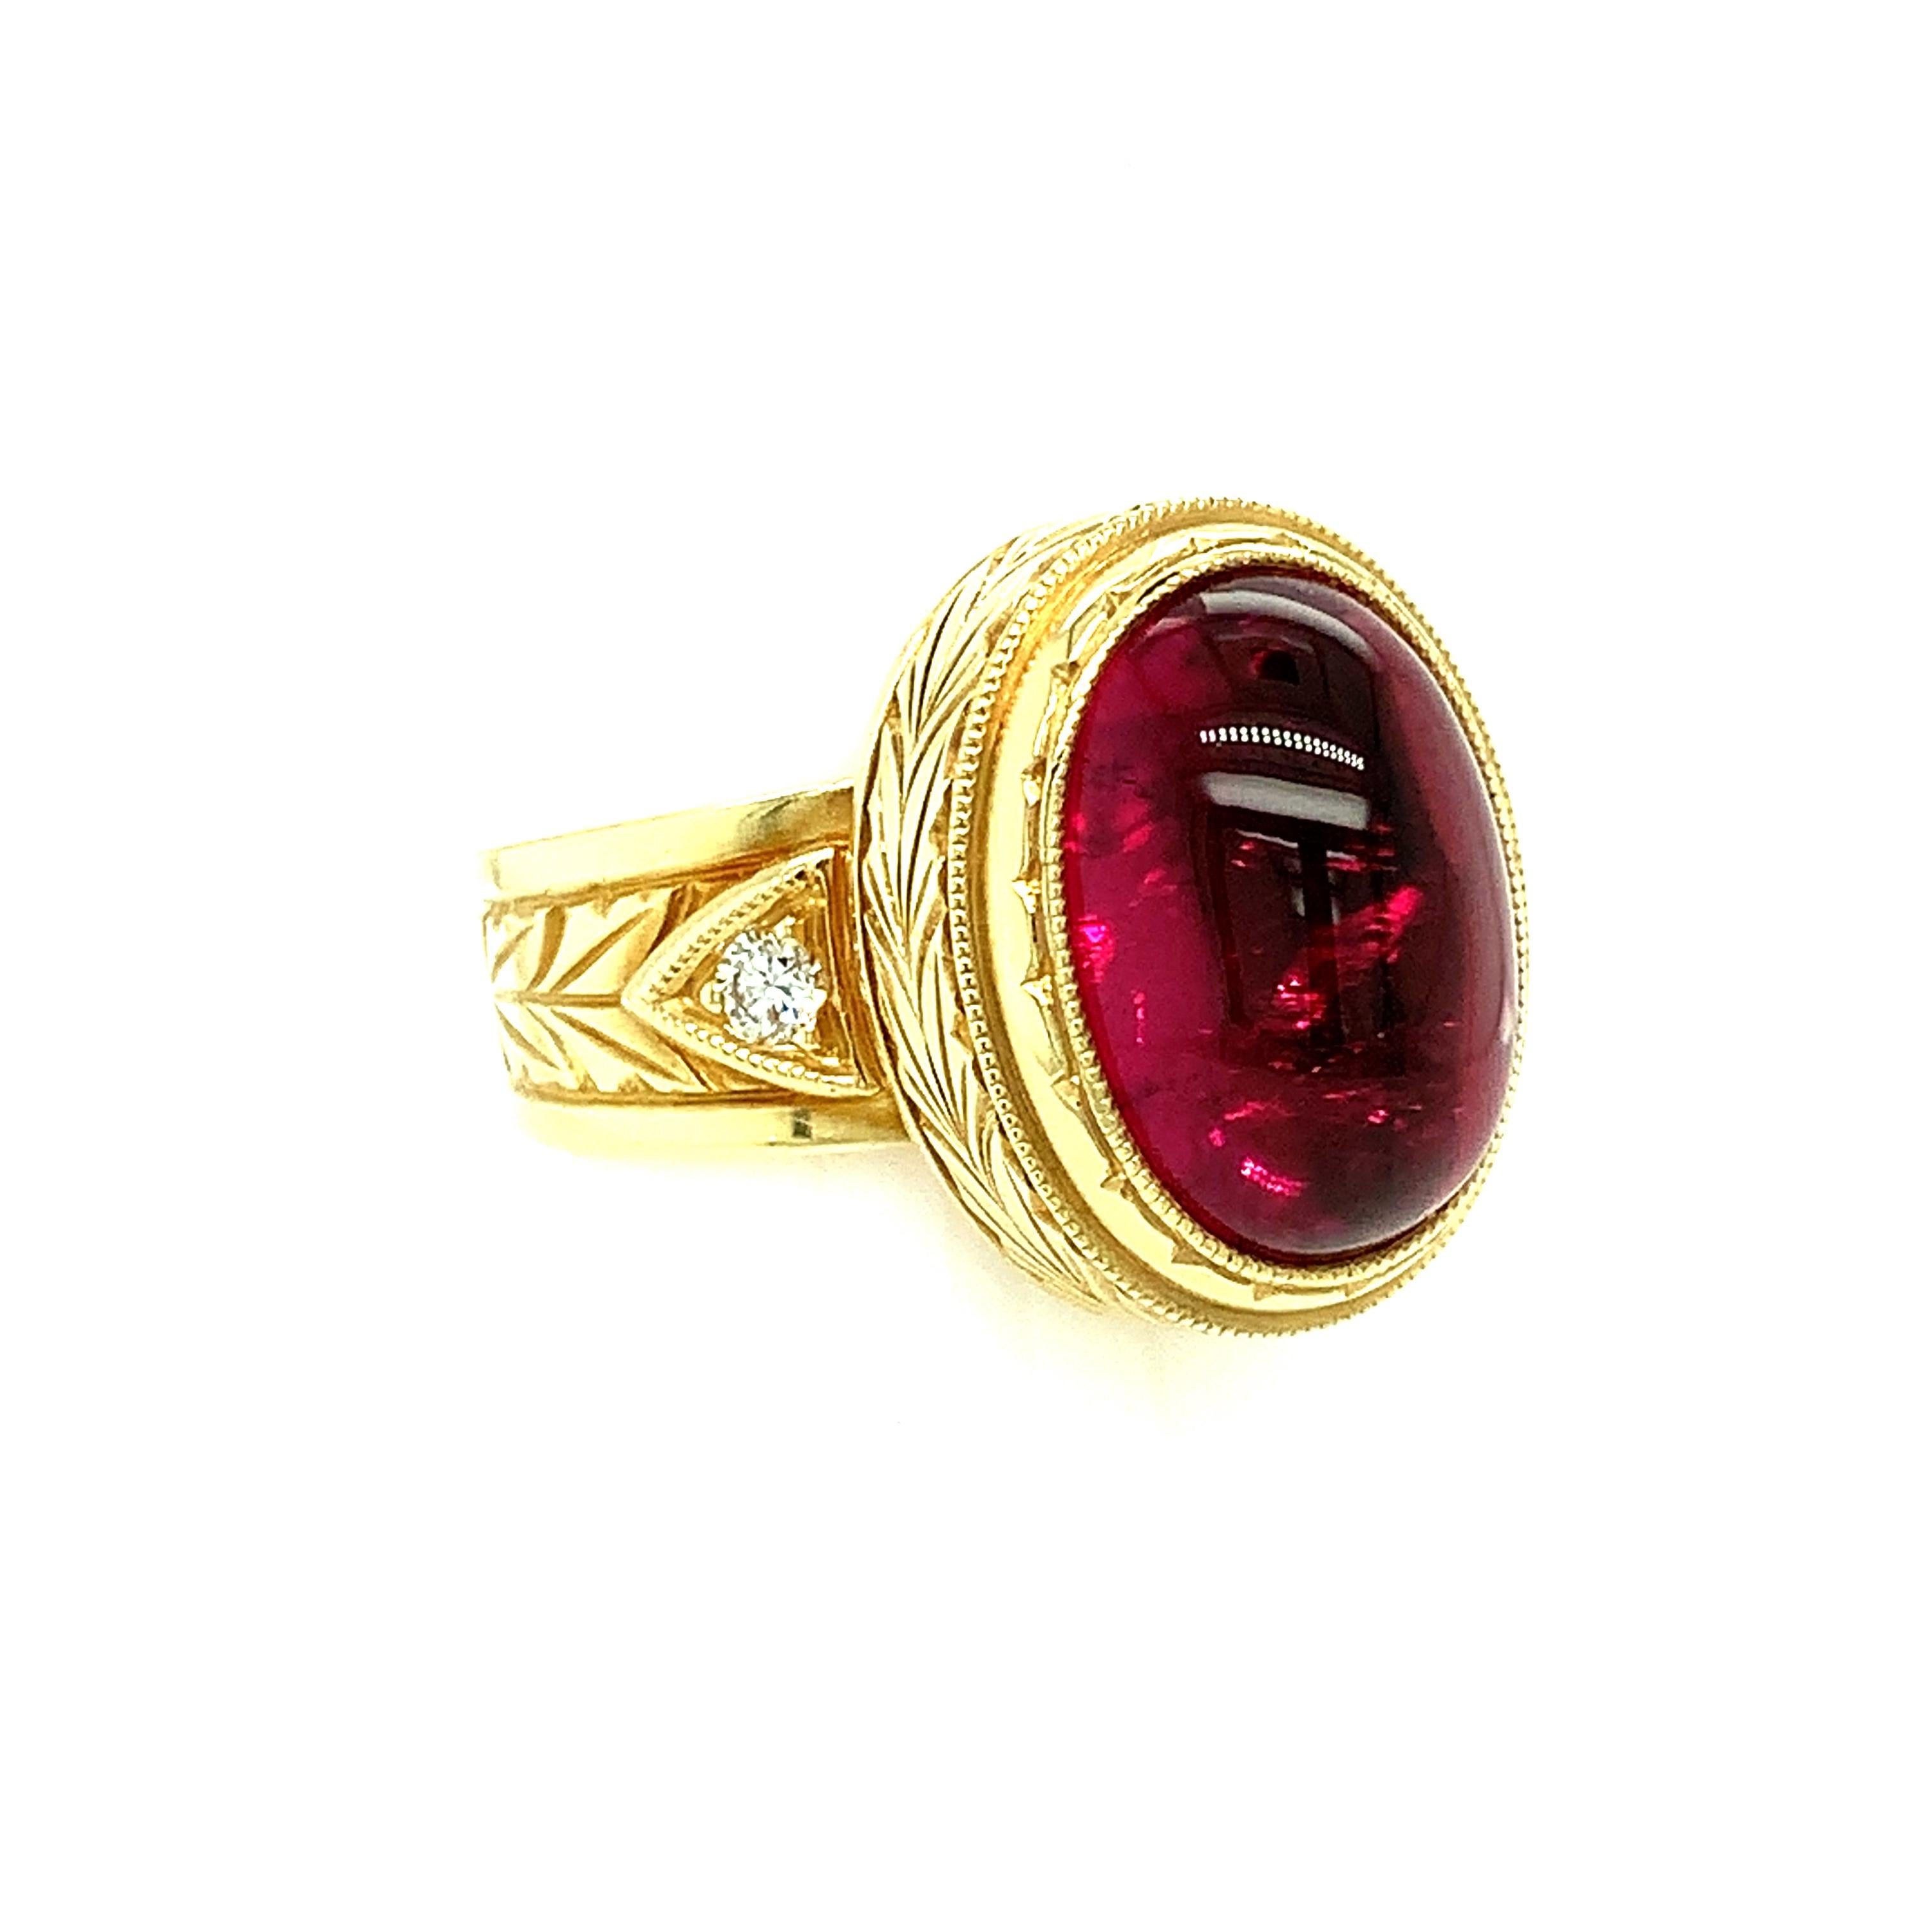 7.47 Carat Rubellite Tourmaline Cabochon and Diamond Band Ring in Yellow Gold In New Condition For Sale In Los Angeles, CA